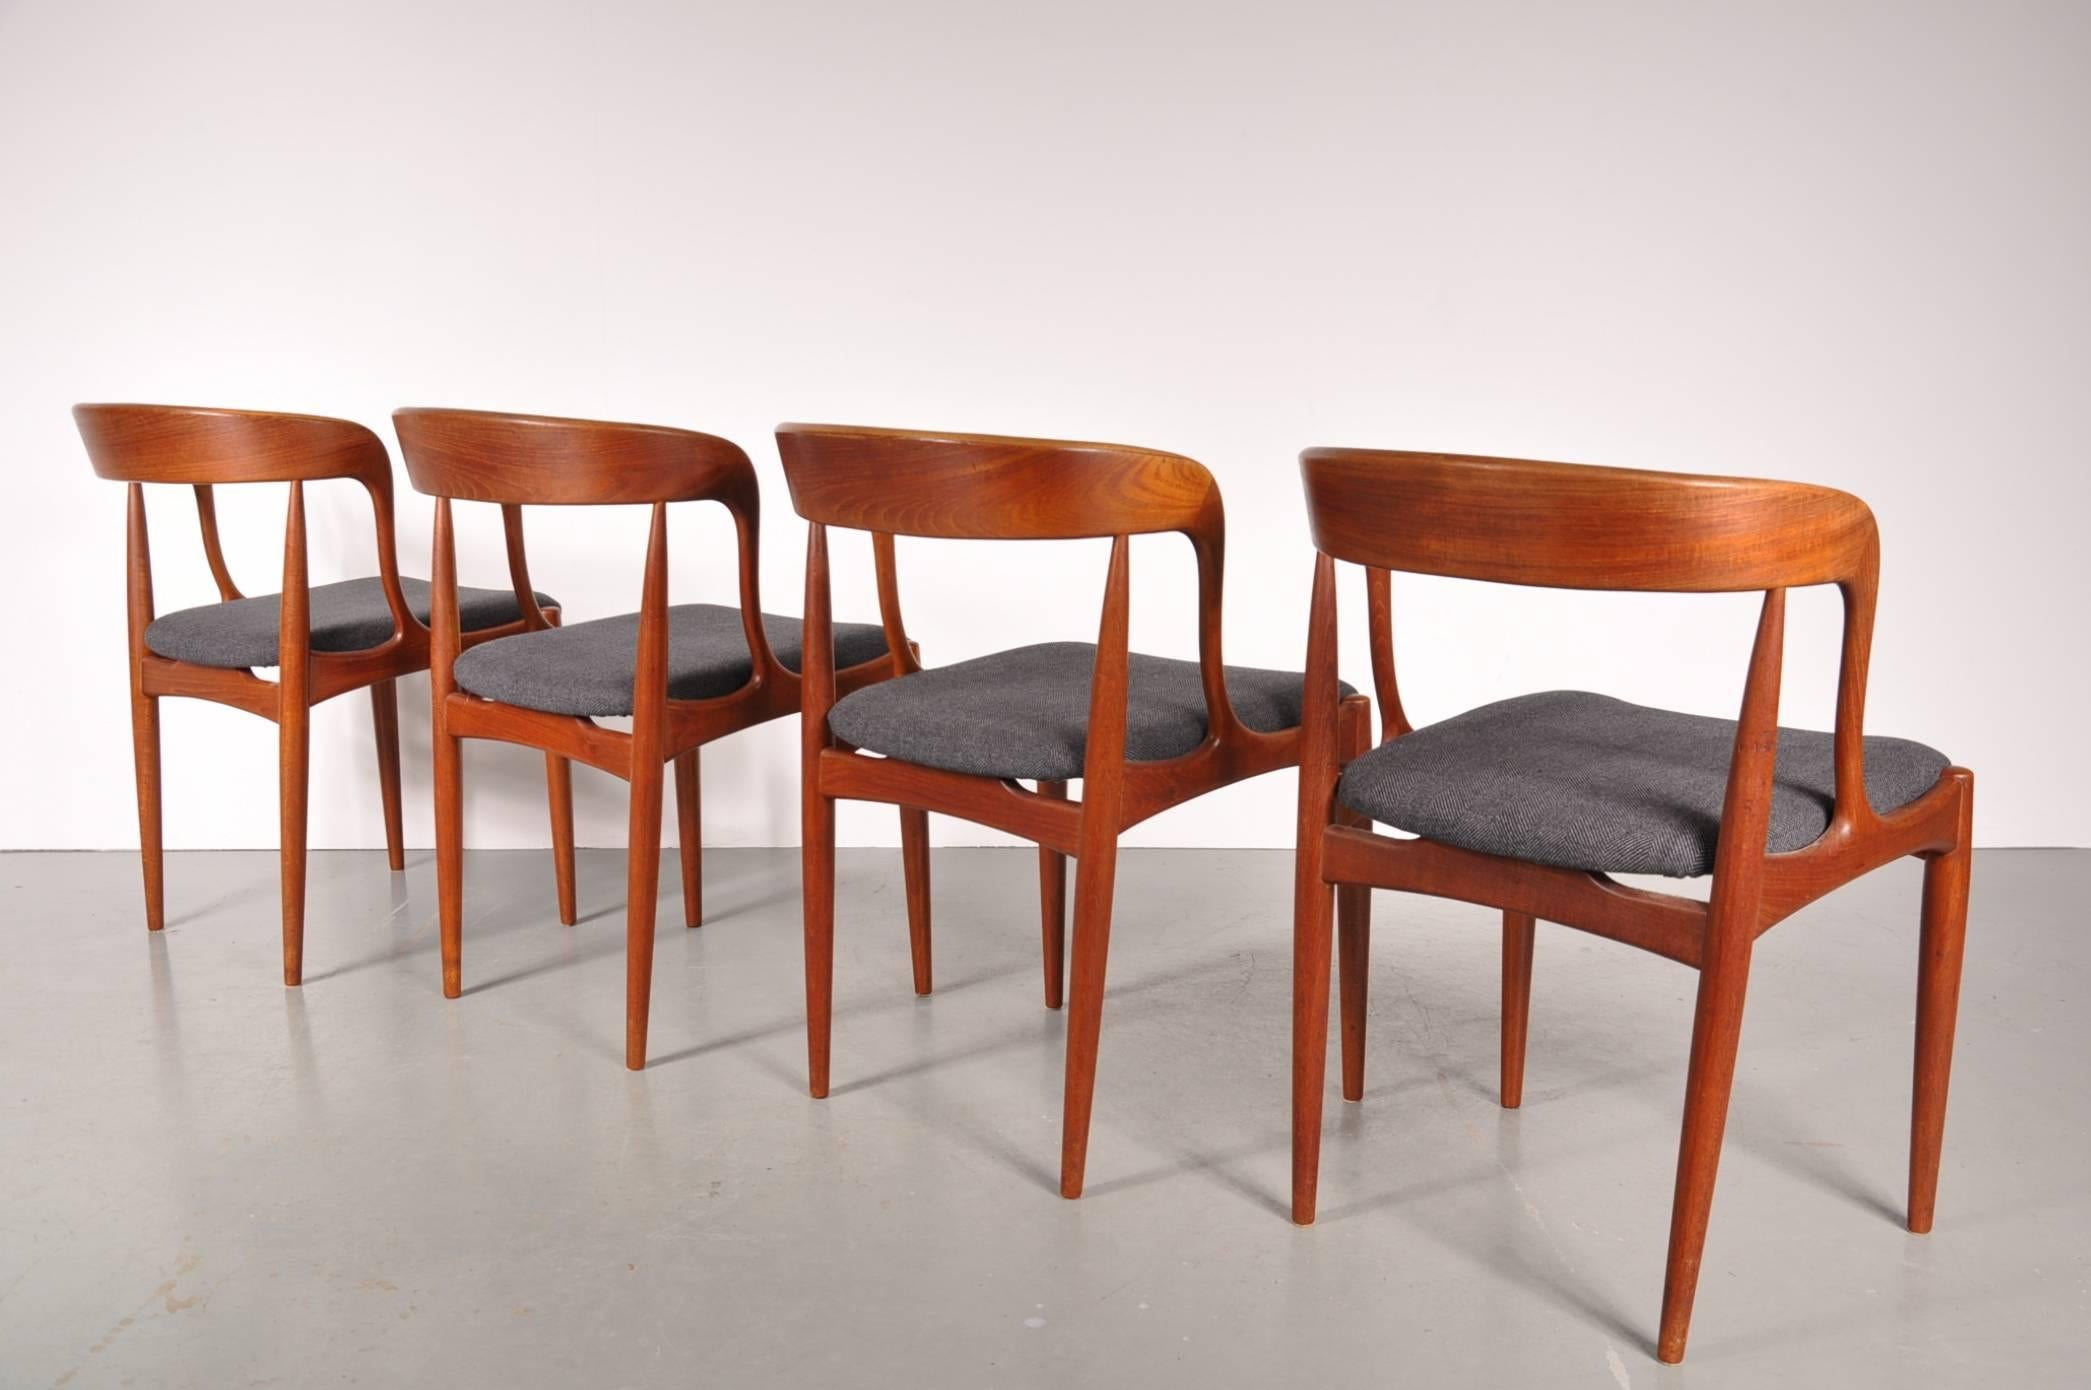 Danish Set of Four Dining Chairs by Johannes Andersen, Denmark, circa 1950